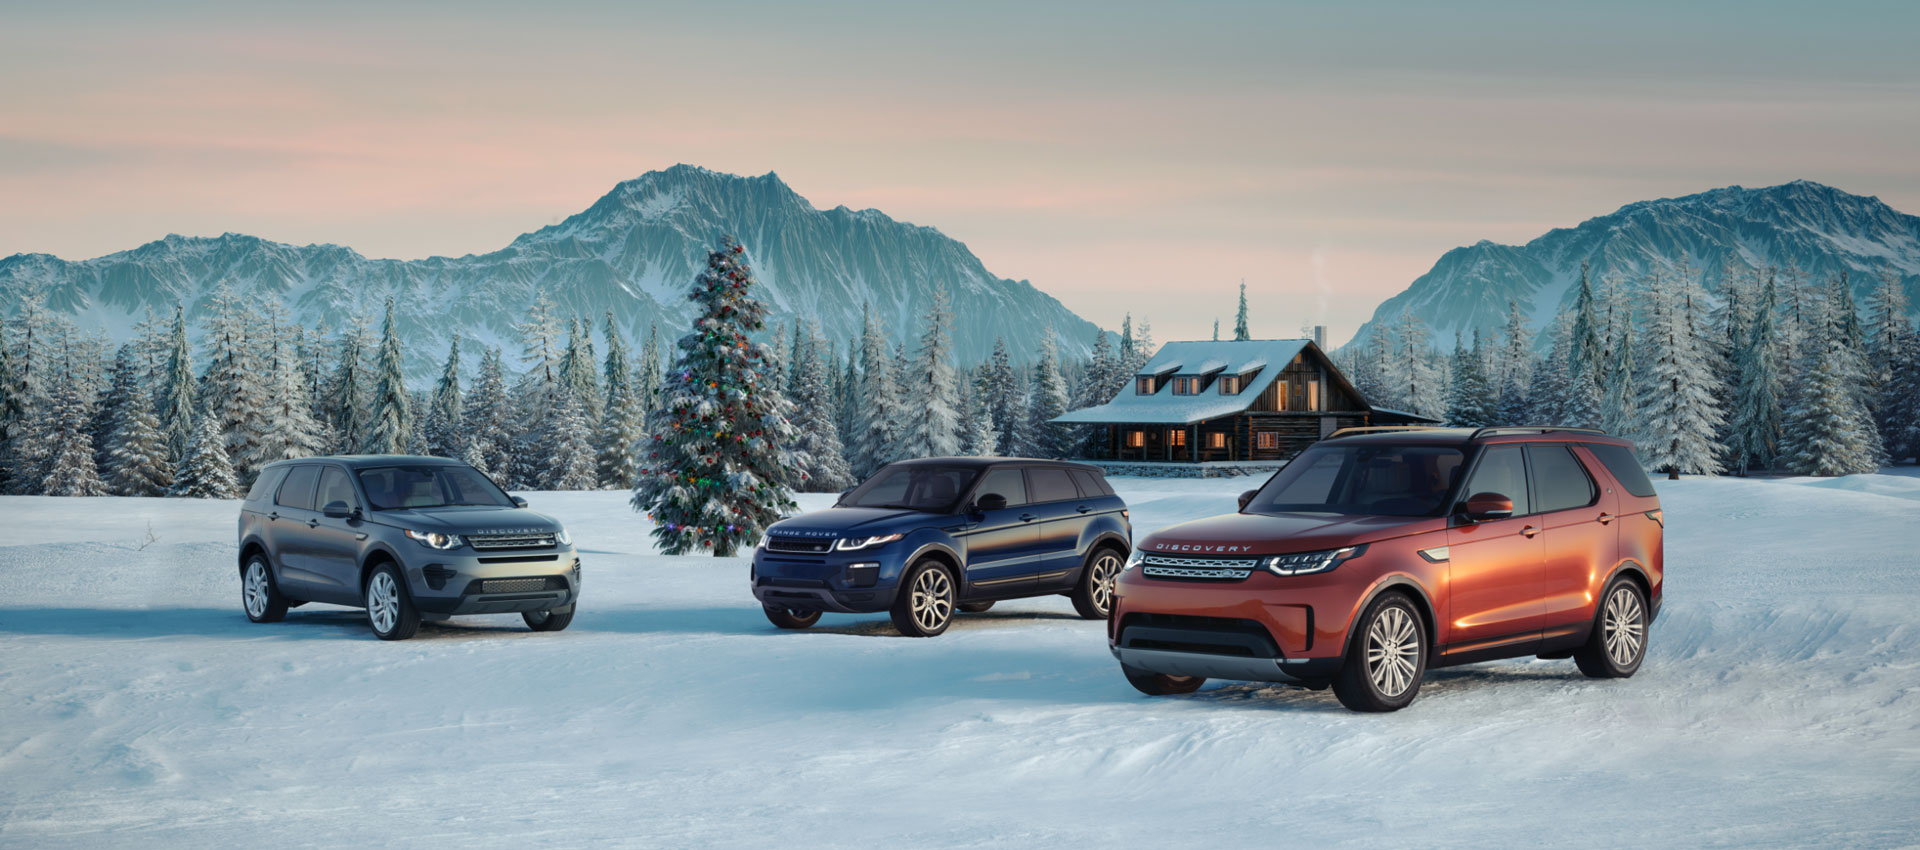 Jaguar Land Rover’s TV and Digital Campaign Goes Above and Beyond with dentsu X